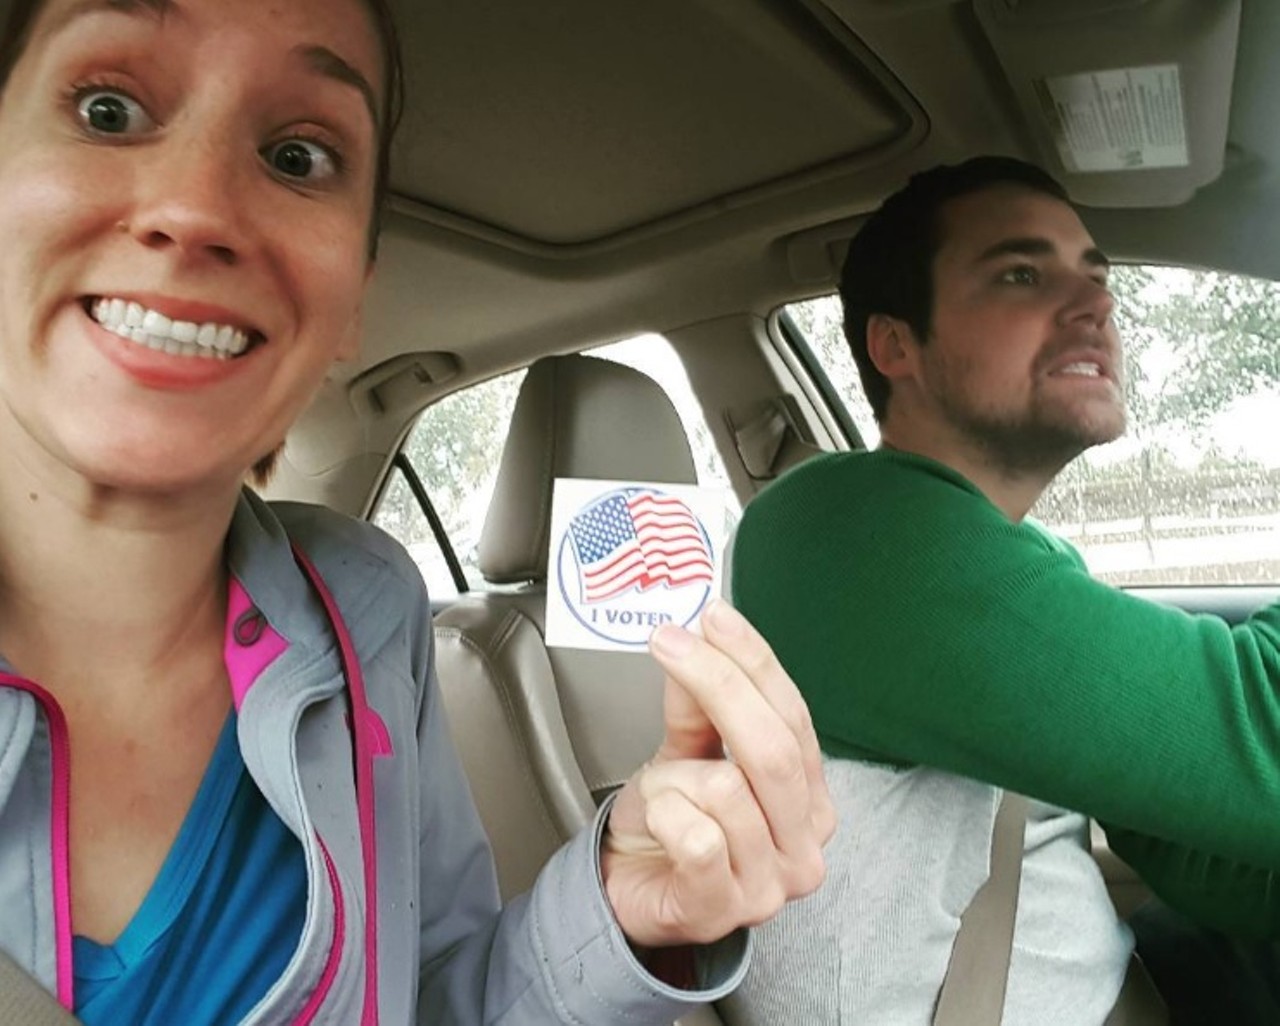 PSA: Don't vote and drive, folks. Photo courtesy of Instagram / emilyparkway.